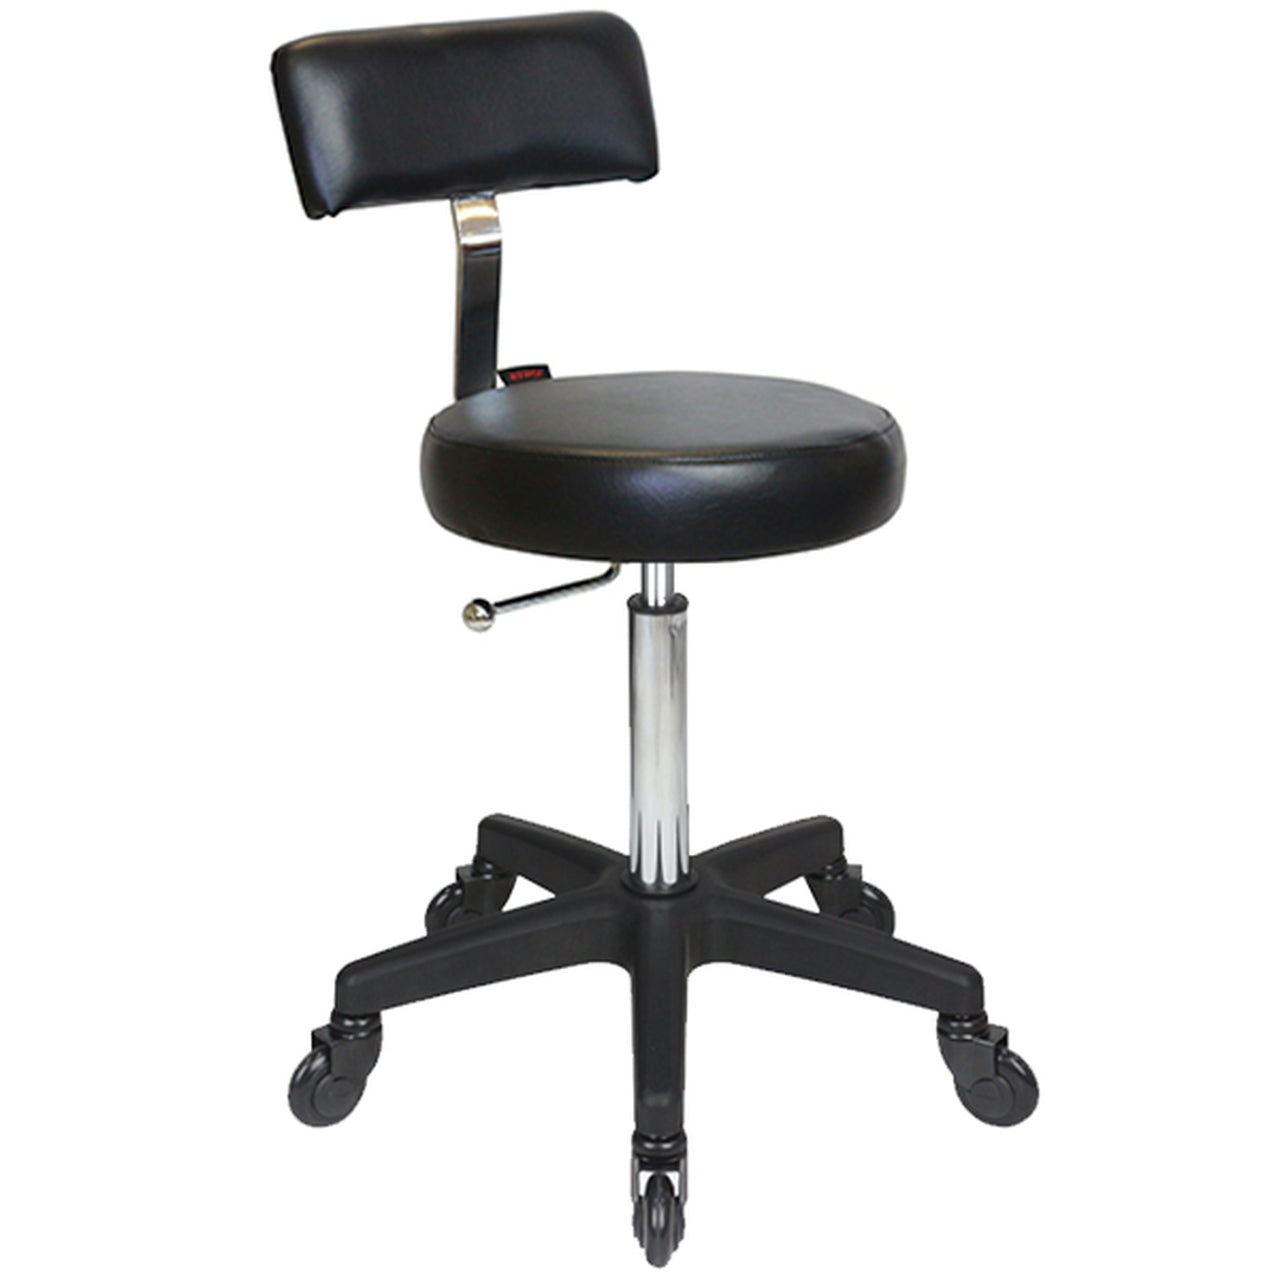 Sprint - Black Base - (Black Upholstery)   With
CLICK'NCLEAN Castors